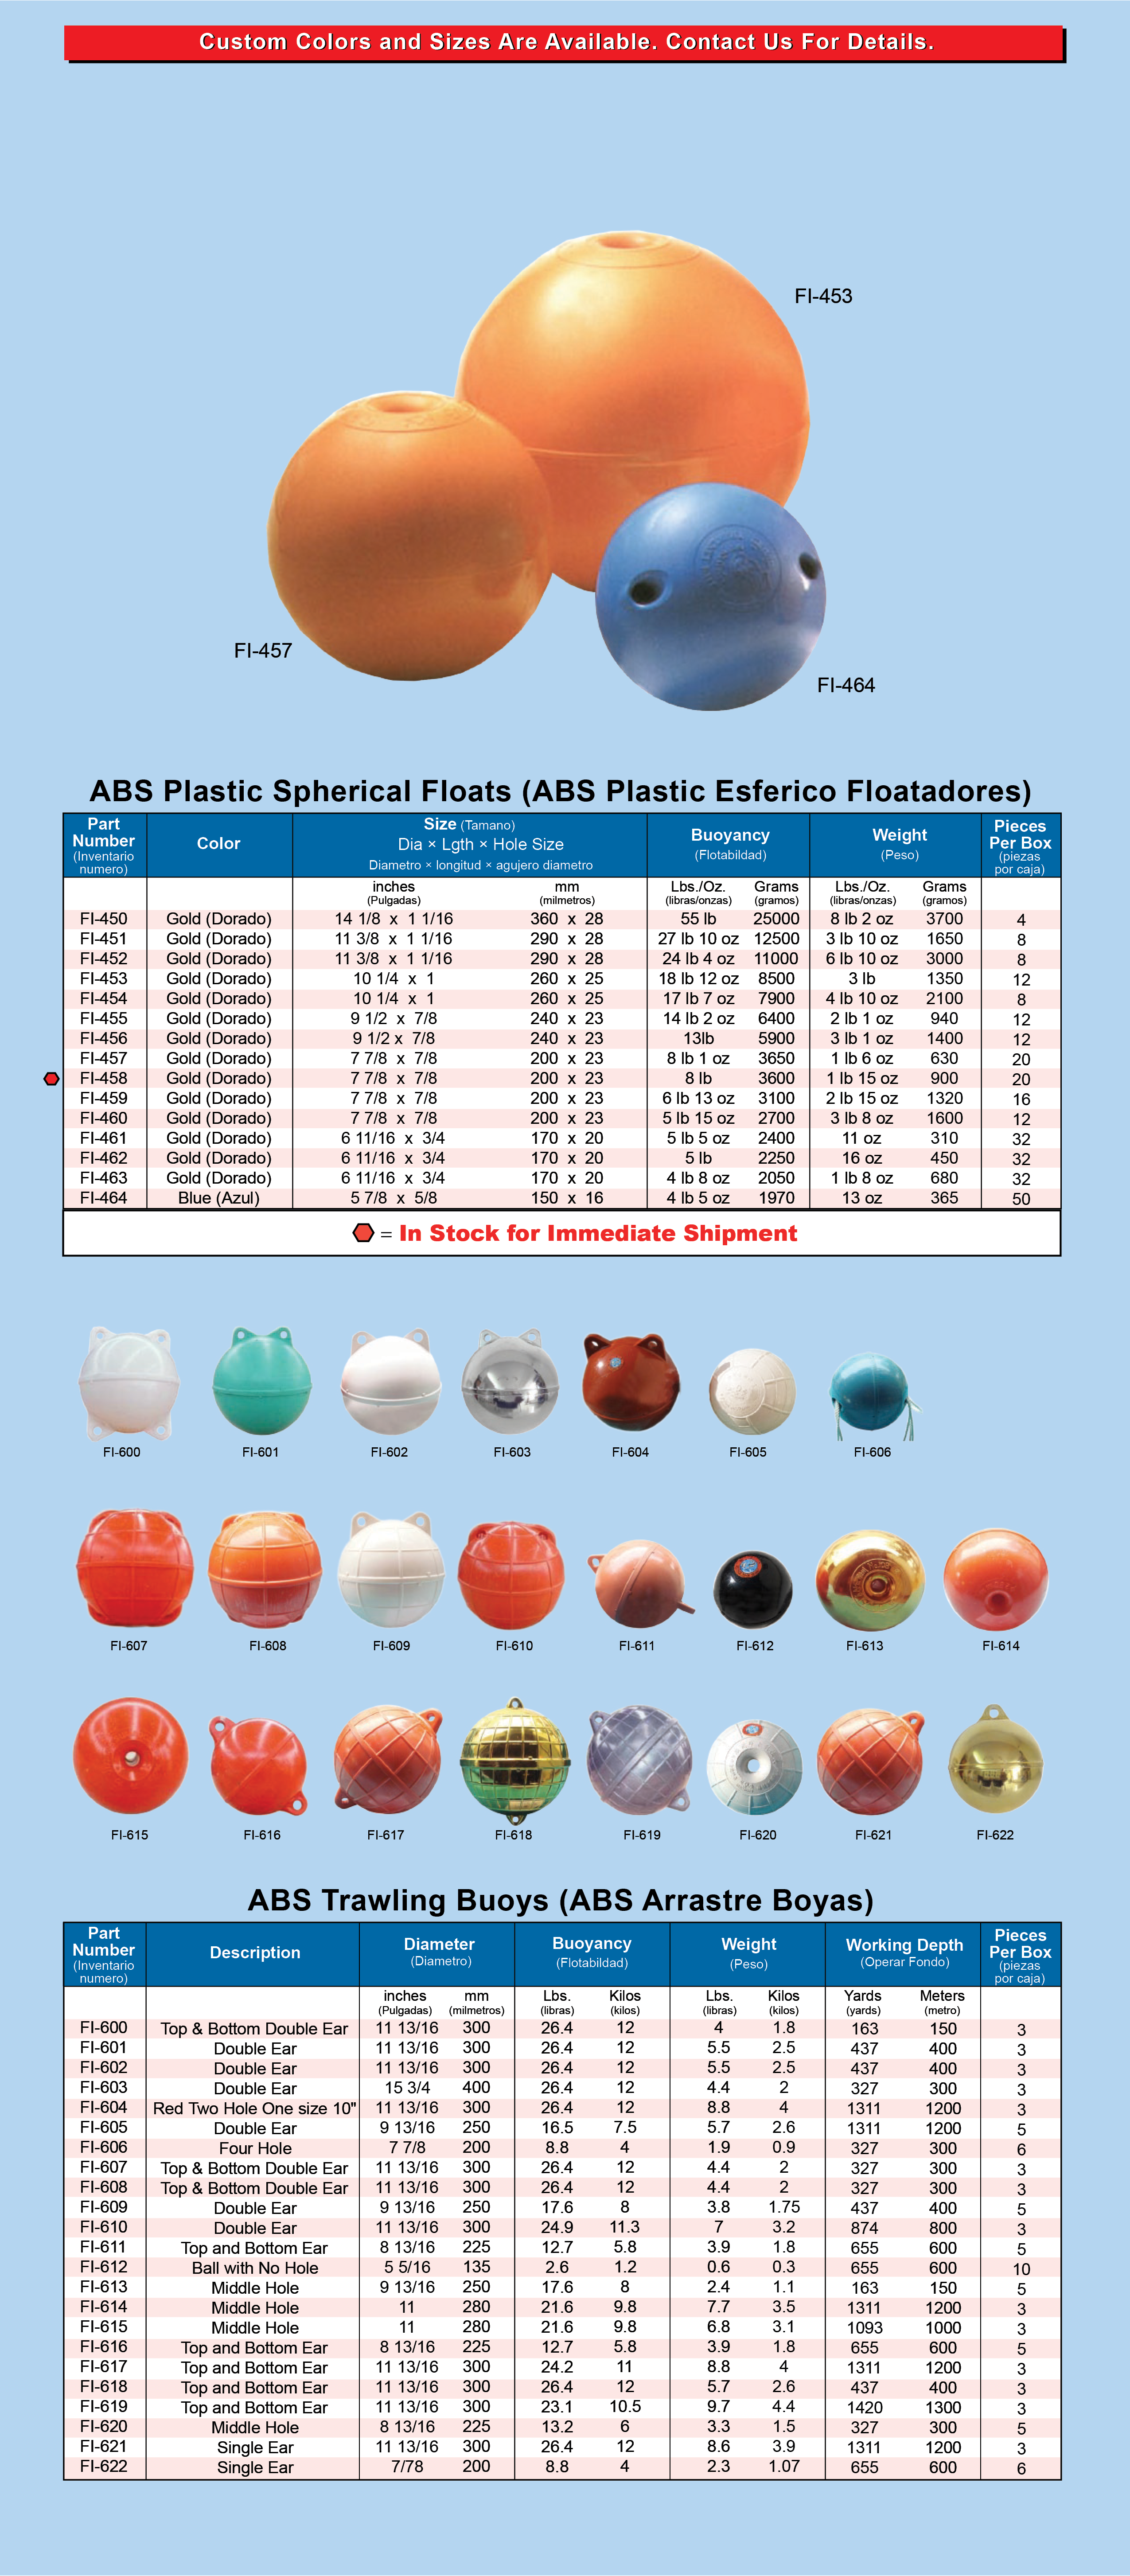 ABS Spherical Trawls and Buoy